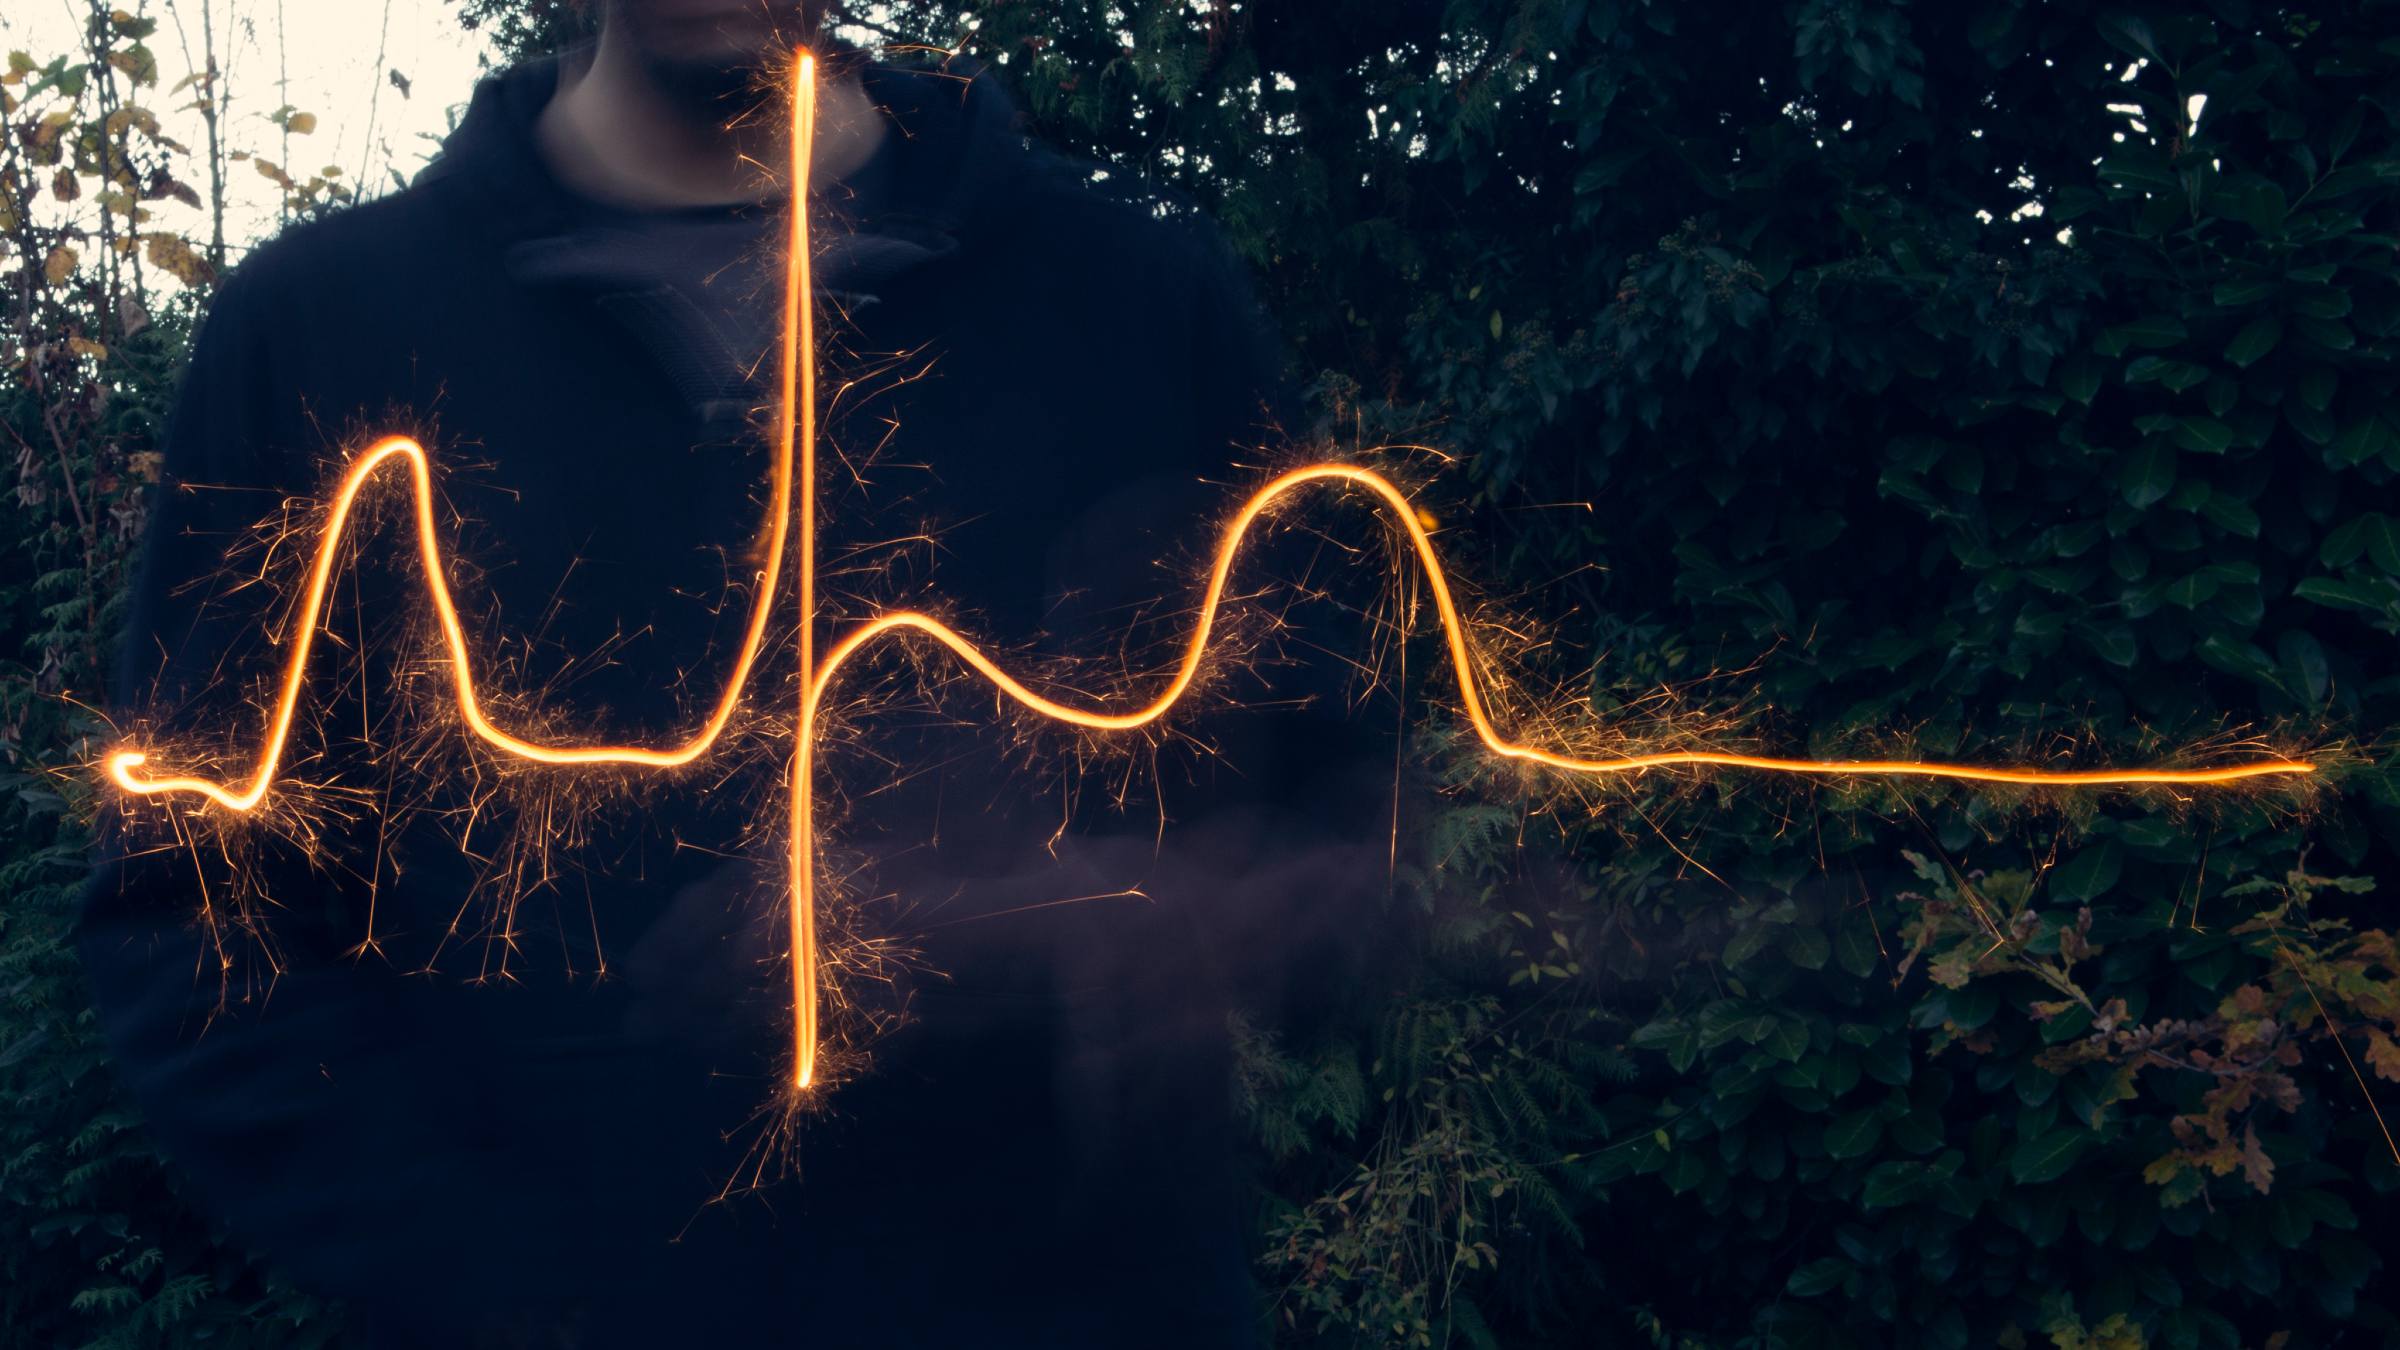 Heart rhythm line drawn out in the dark with a sparkler